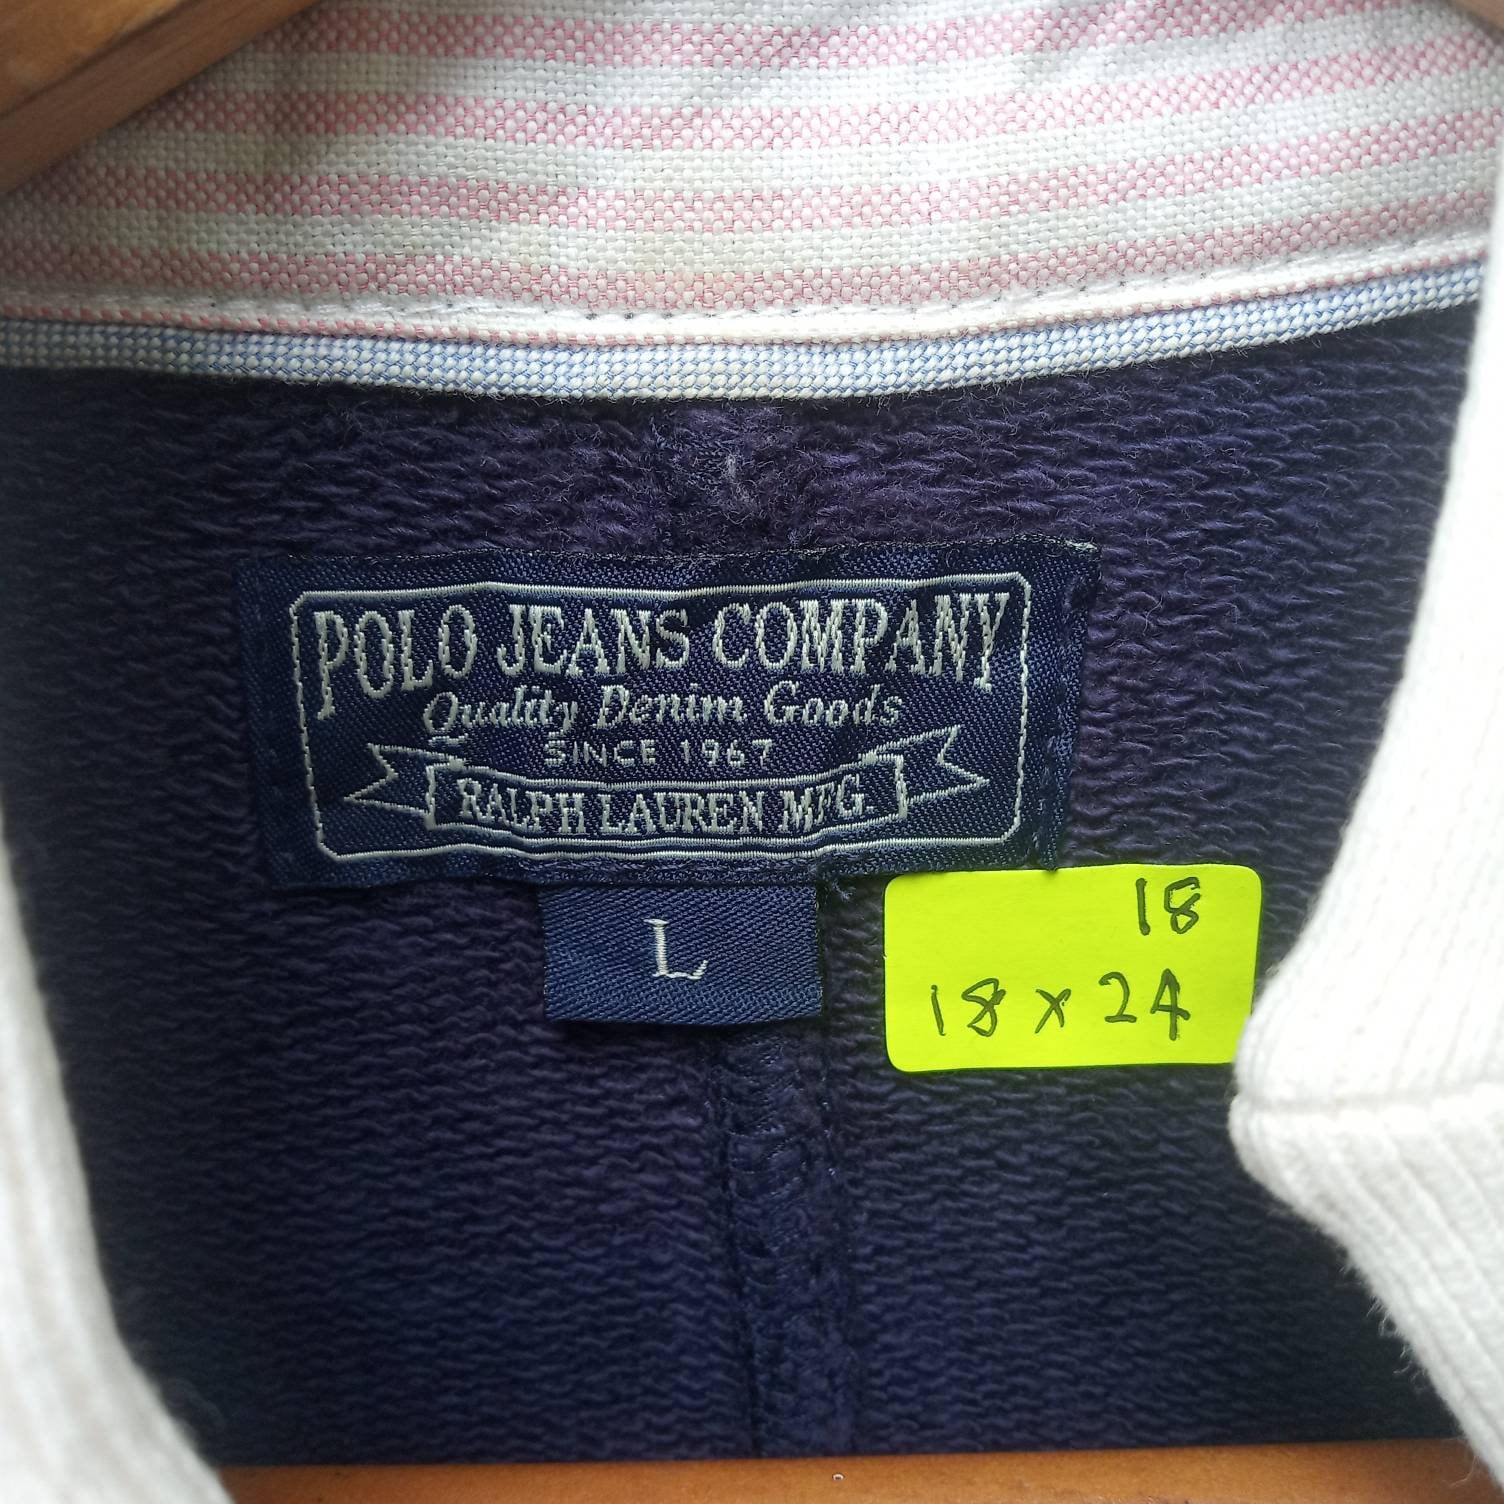 Rare Vintage Polo Ralph Lauren by Polo Jeans Company - Etsy